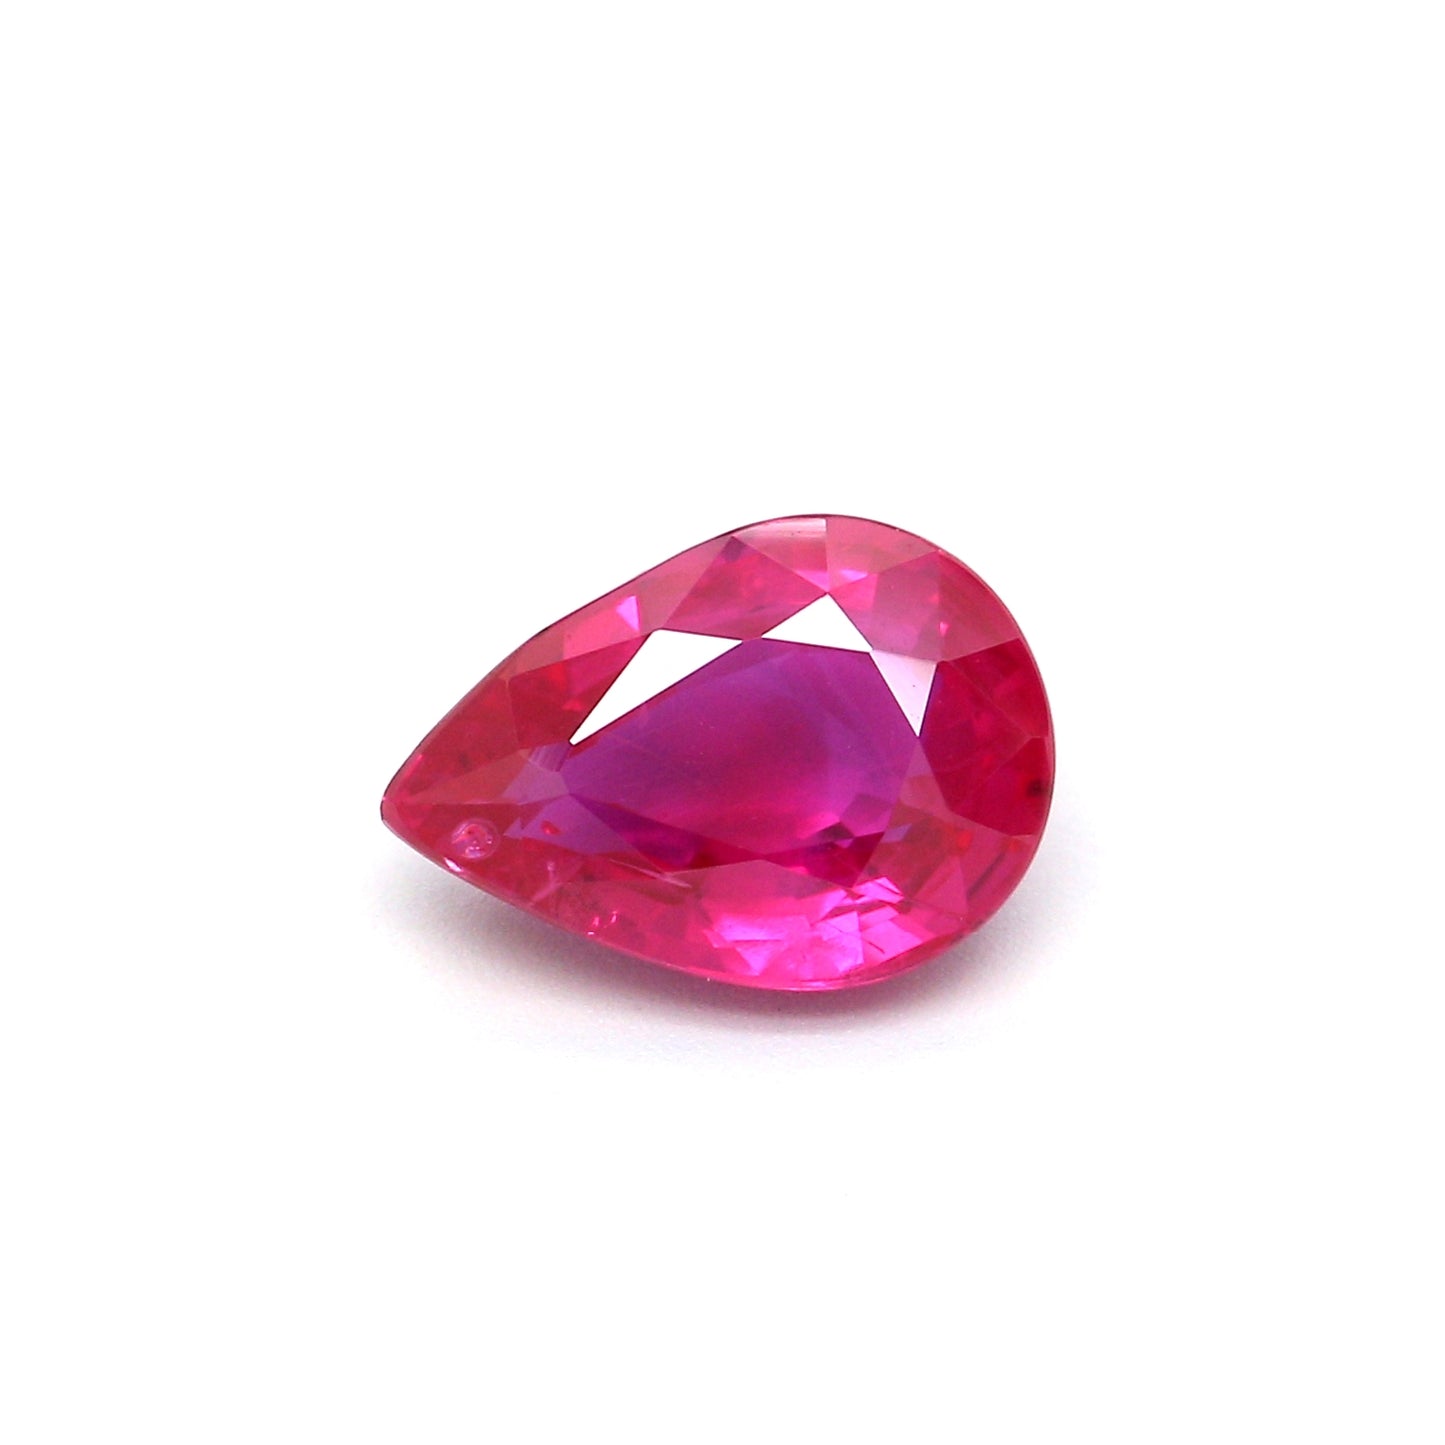 1.34ct Pinkish Red, Pear Shape Ruby, H(a), Myanmar - 7.95 x 5.61 x 3.49mm